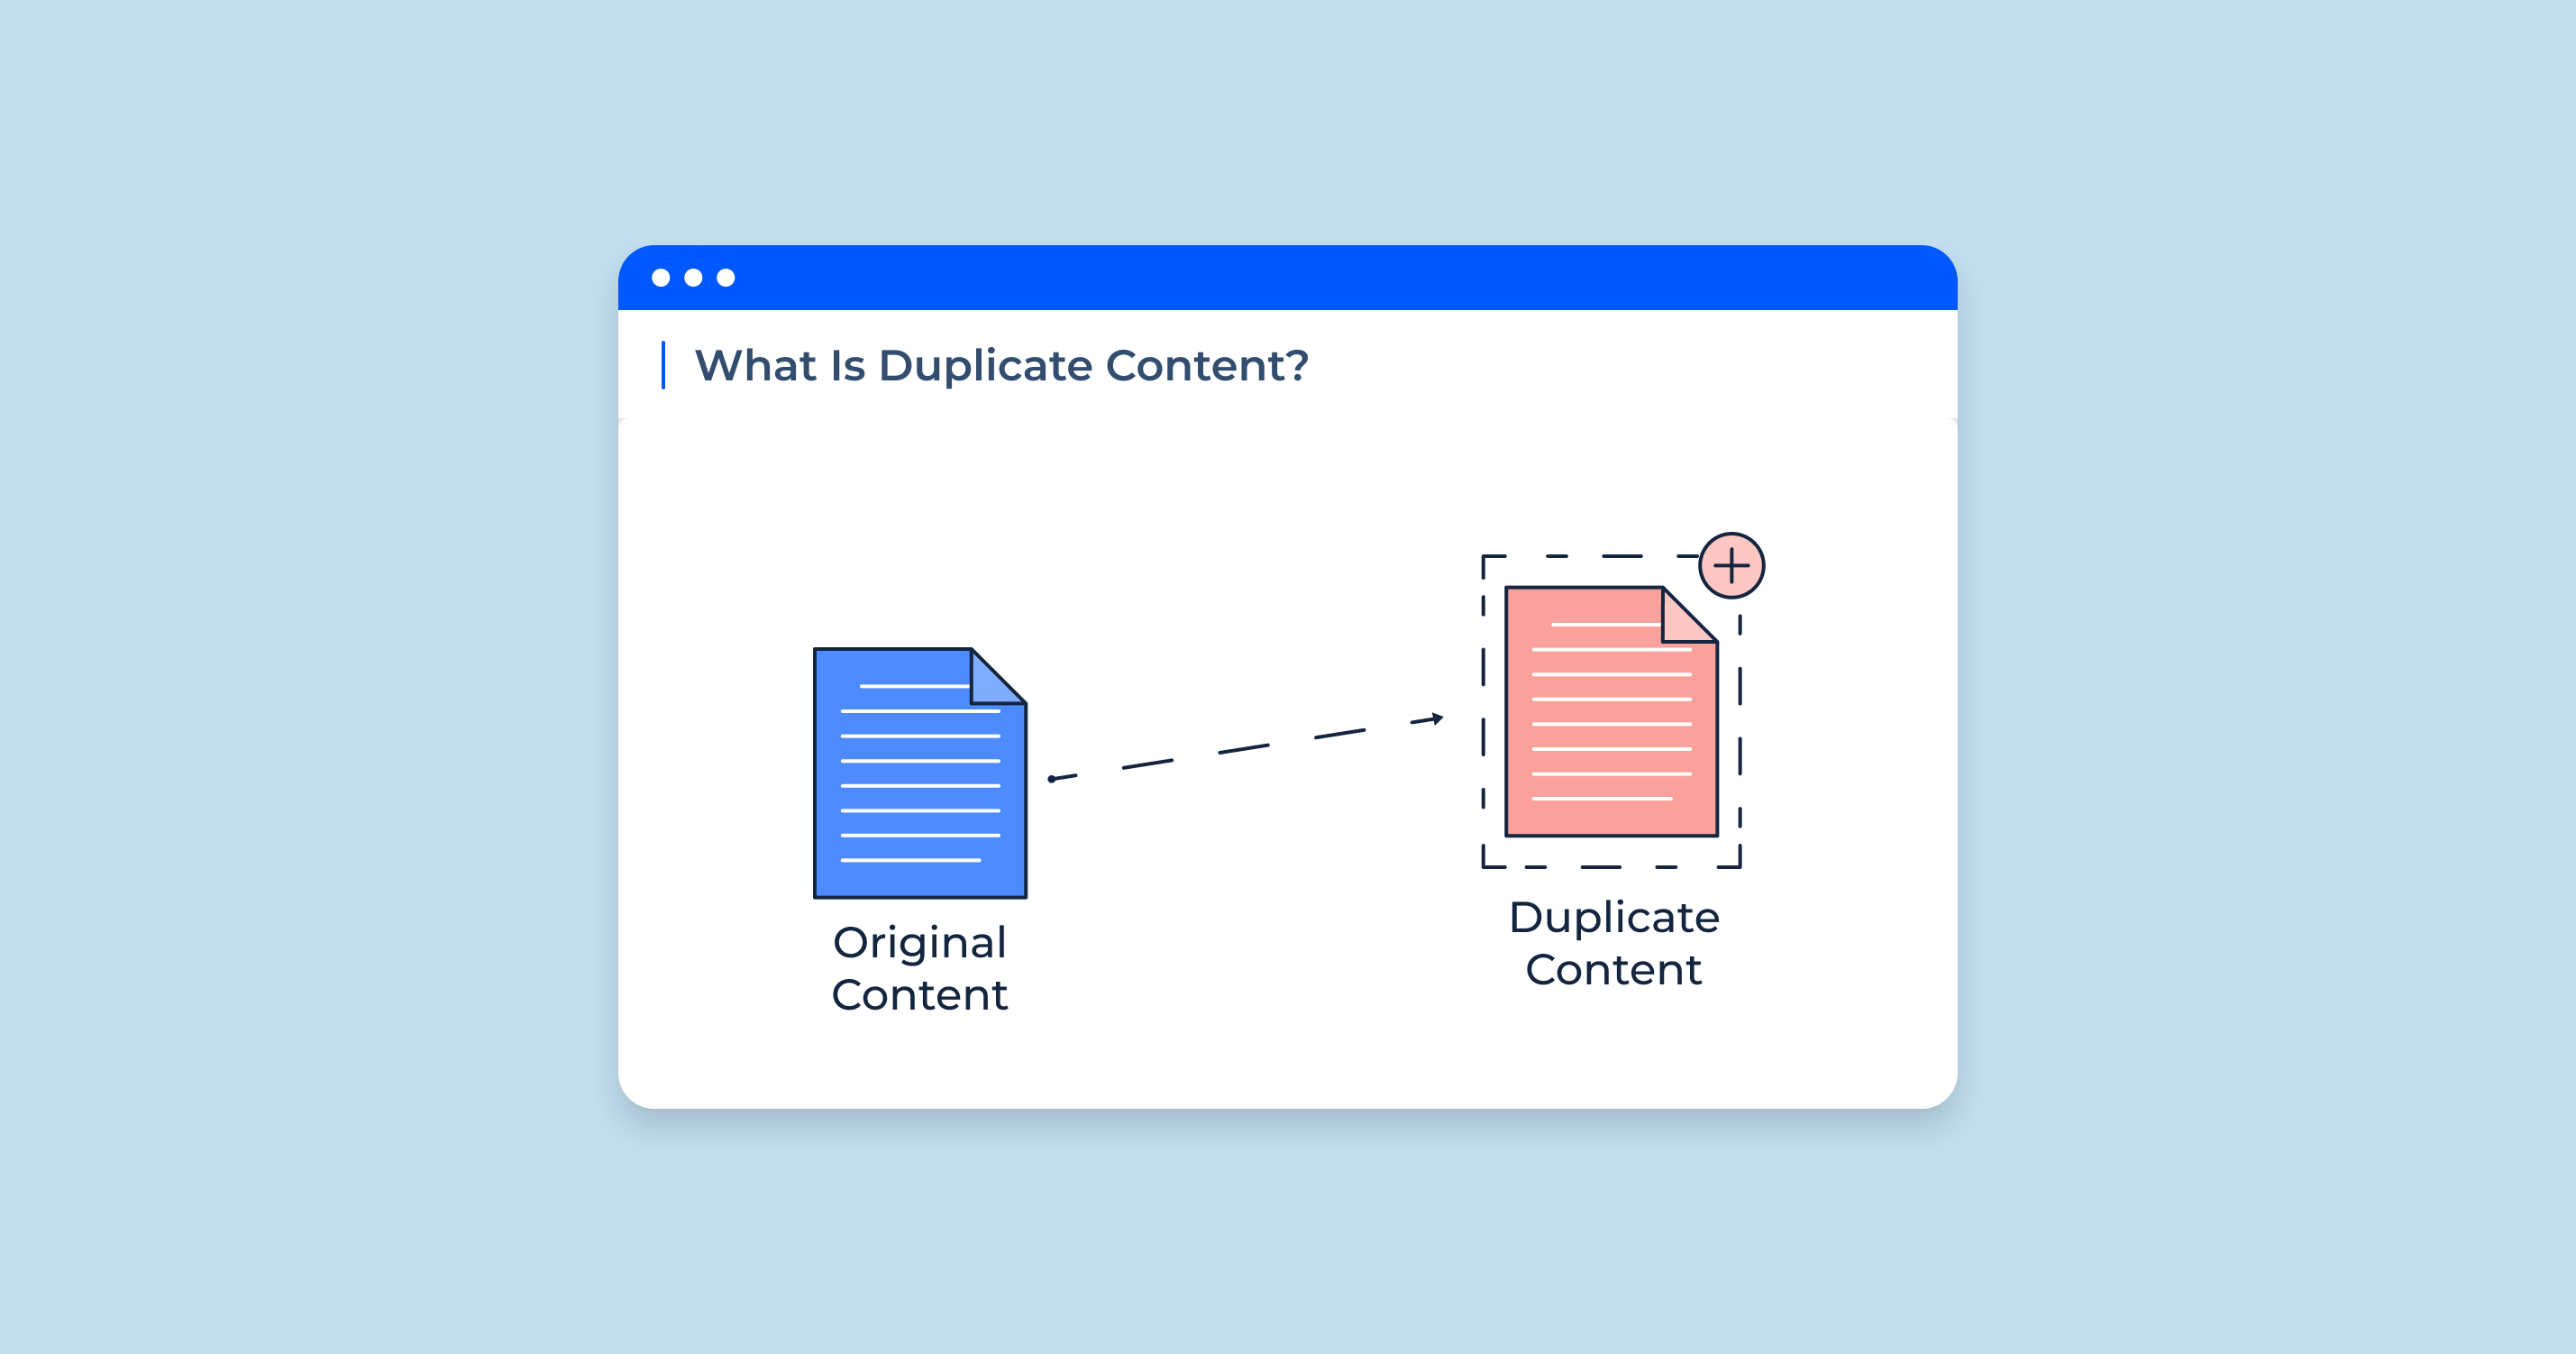 Why Does Duplicate Content Matter?